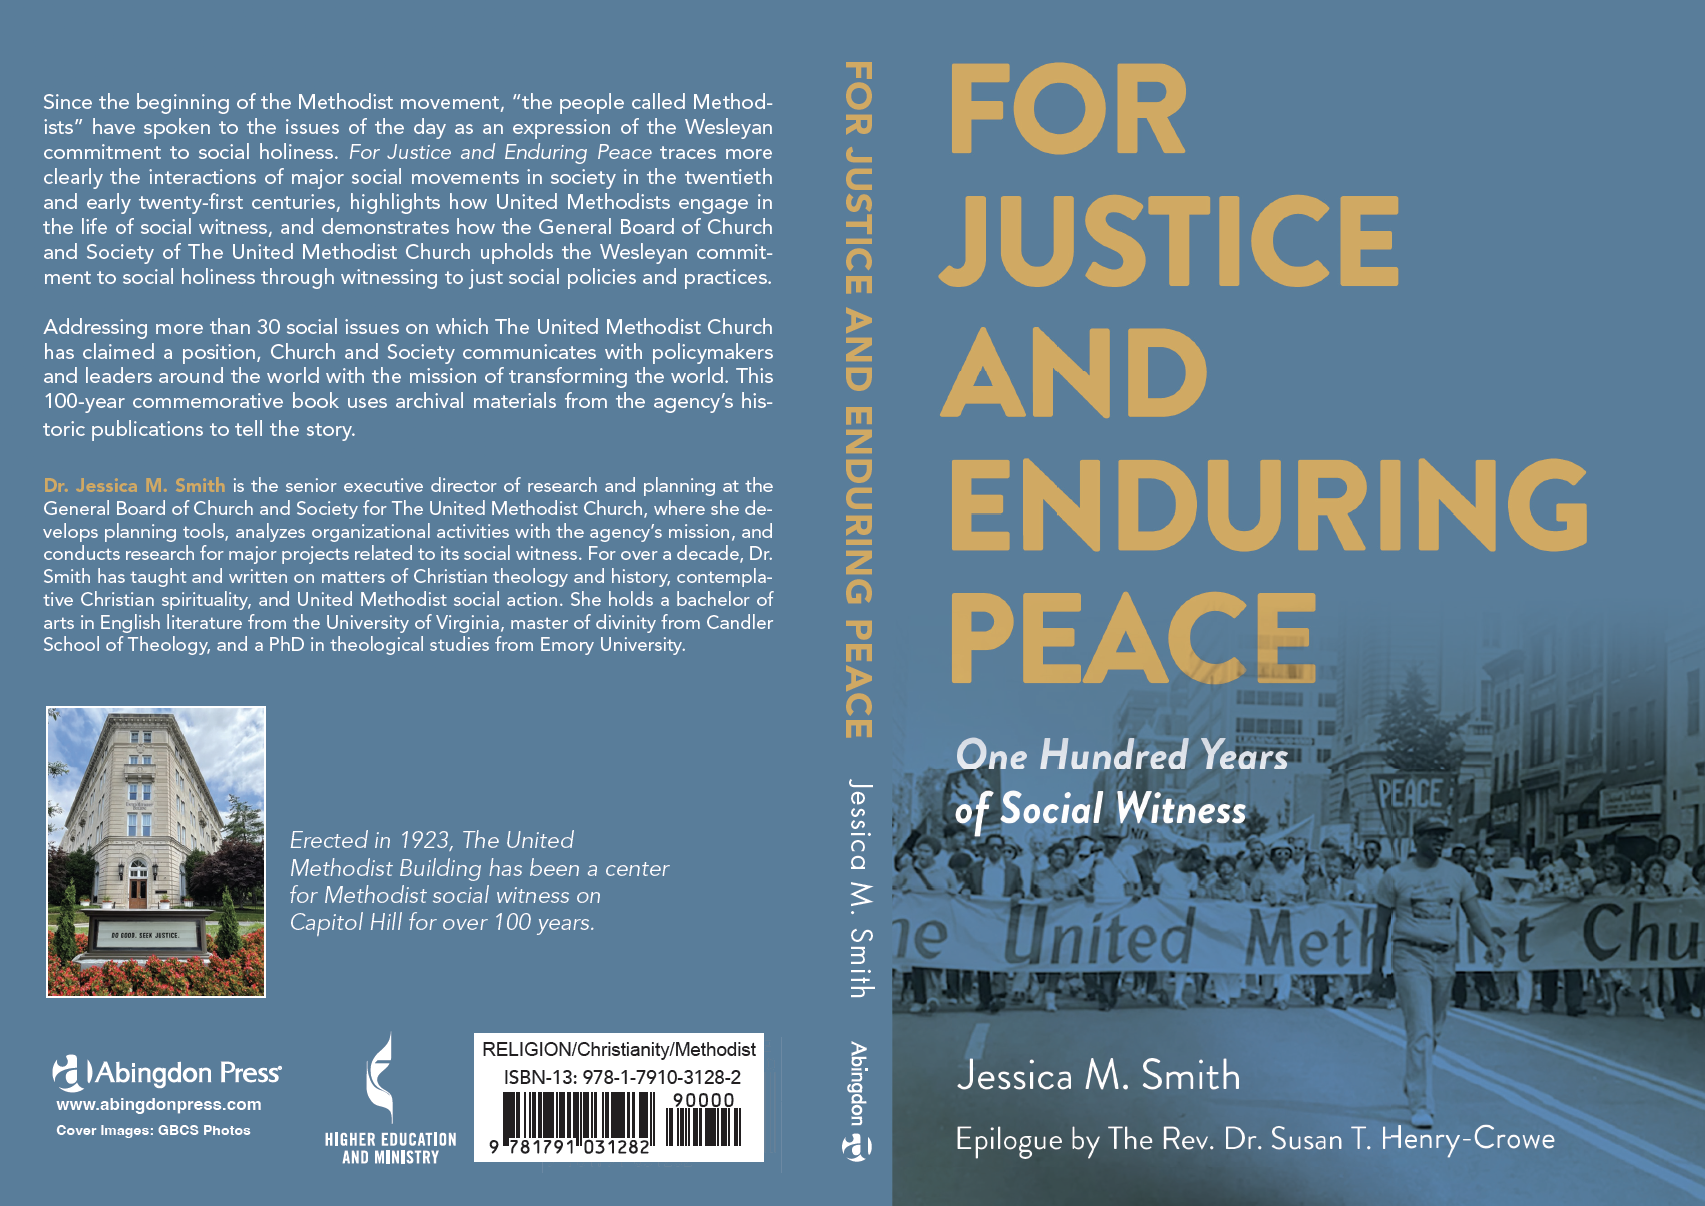 Cover of "For Justice And Enduring Peace Book" by Jessica M. Smith